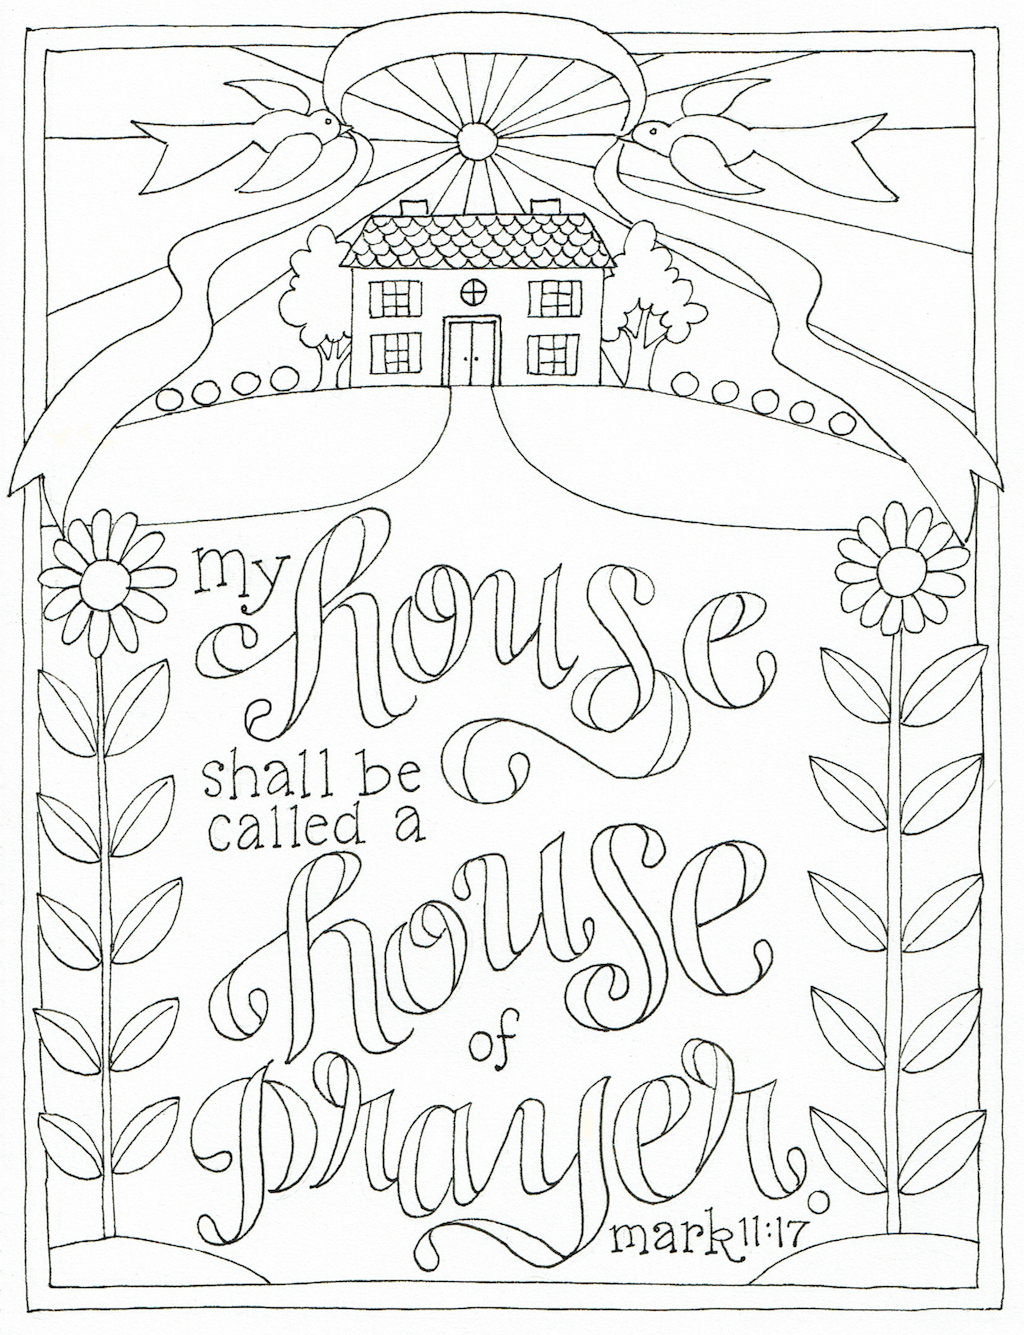 House of Prayer Coloring Page - Flanders Family Homelife